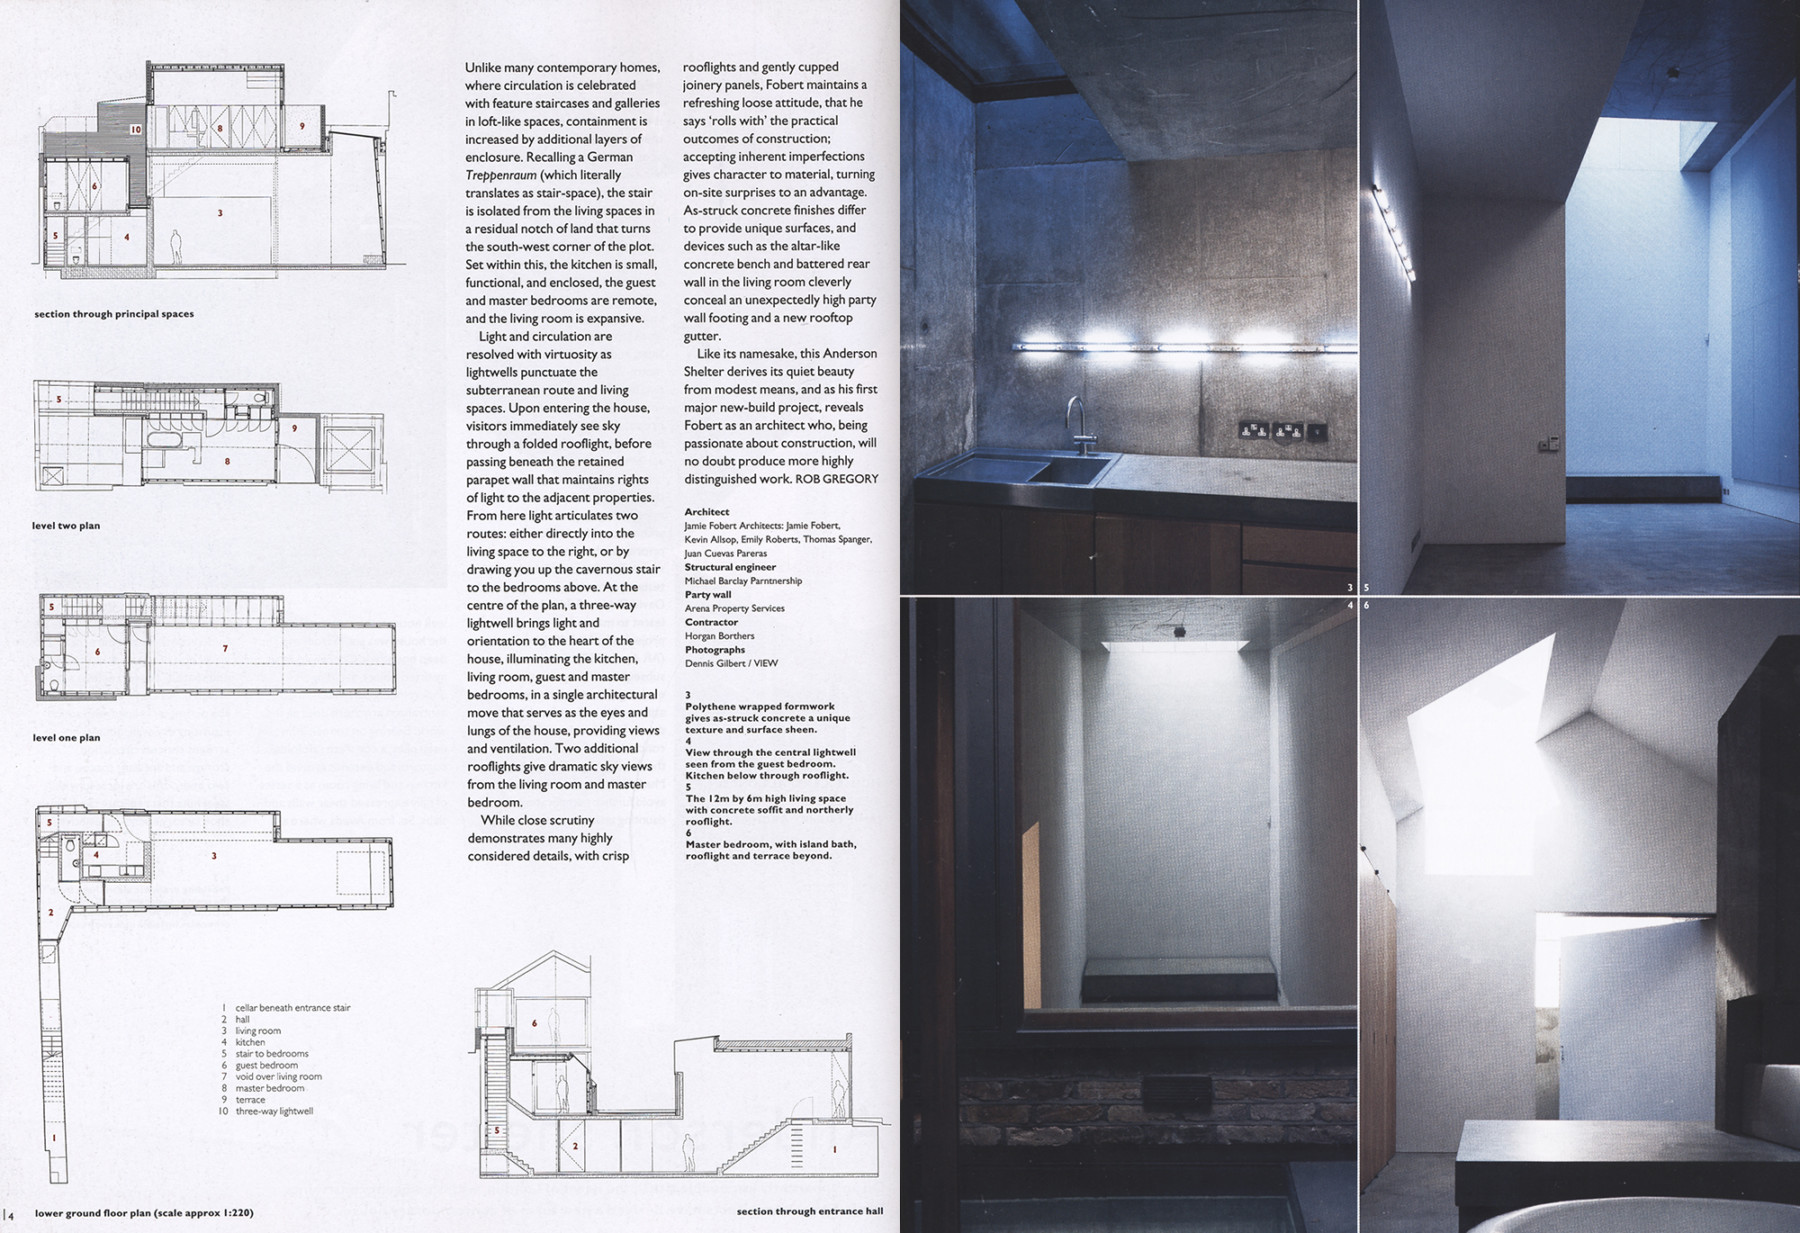 Jamie-Fobert-Architects-Anderson-House-Architectural-Review 2